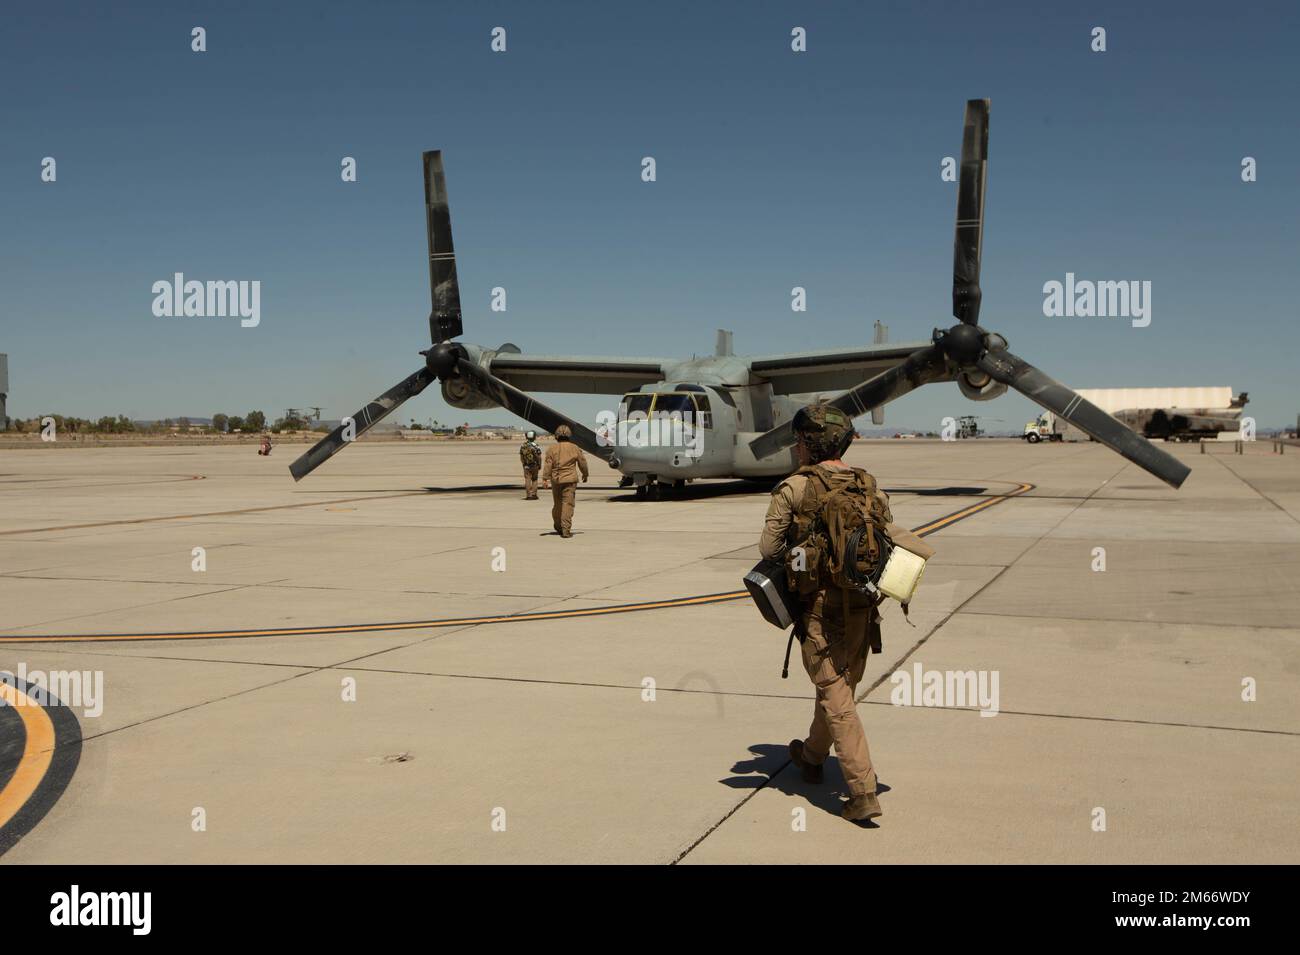 U.S. Marines assigned to Marine Aviation Weapons and Tactics Squadron One (MAWTS-1), prepare for flight aboard an MV-22B Osprey, during Weapons and Tactics Instructor (WTI) course 2-22, at Marine Corps Air Station Yuma, Arizona, April 08, 2022. WTI is a seven-week training event hosted by MAWTS-1, providing standardized advanced tactical training and certification of unit instructor qualifications to support Marine aviation training and readiness, and assists in developing and employing aviation weapons and tactics. Stock Photo